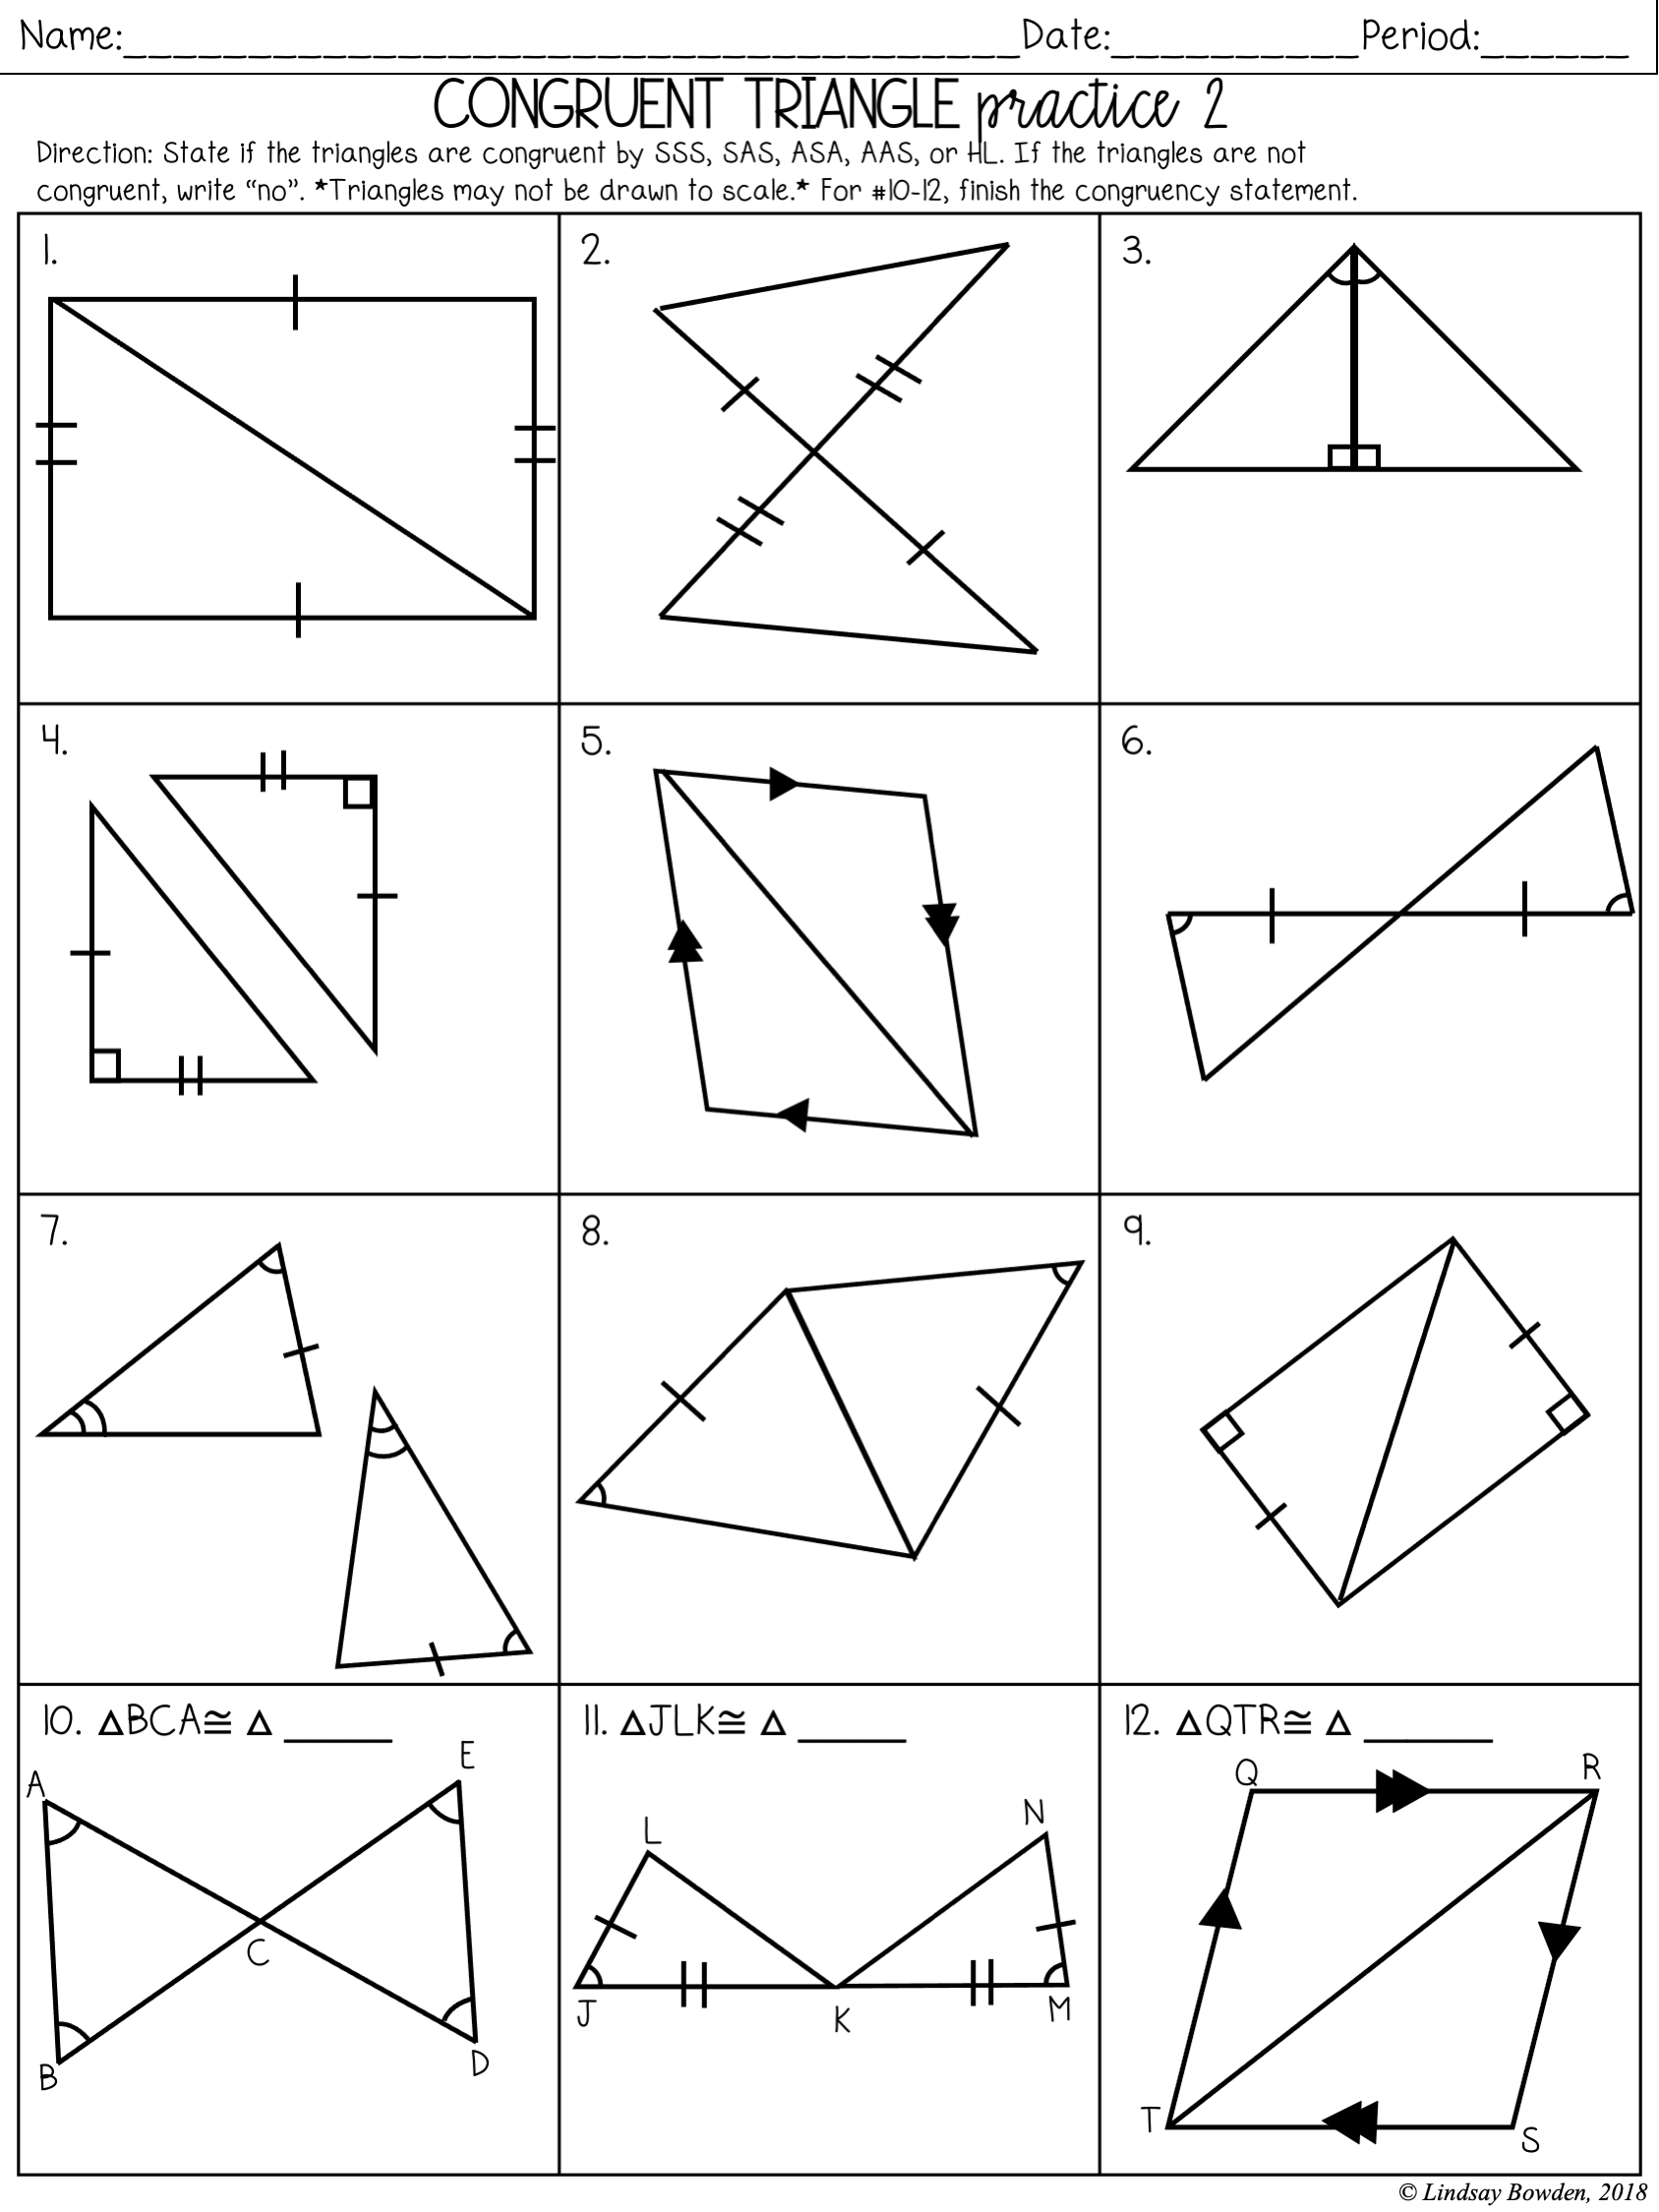 Congruent Triangles Notes and Worksheets - Lindsay Bowden With Regard To Congruent Triangles Worksheet With Answers